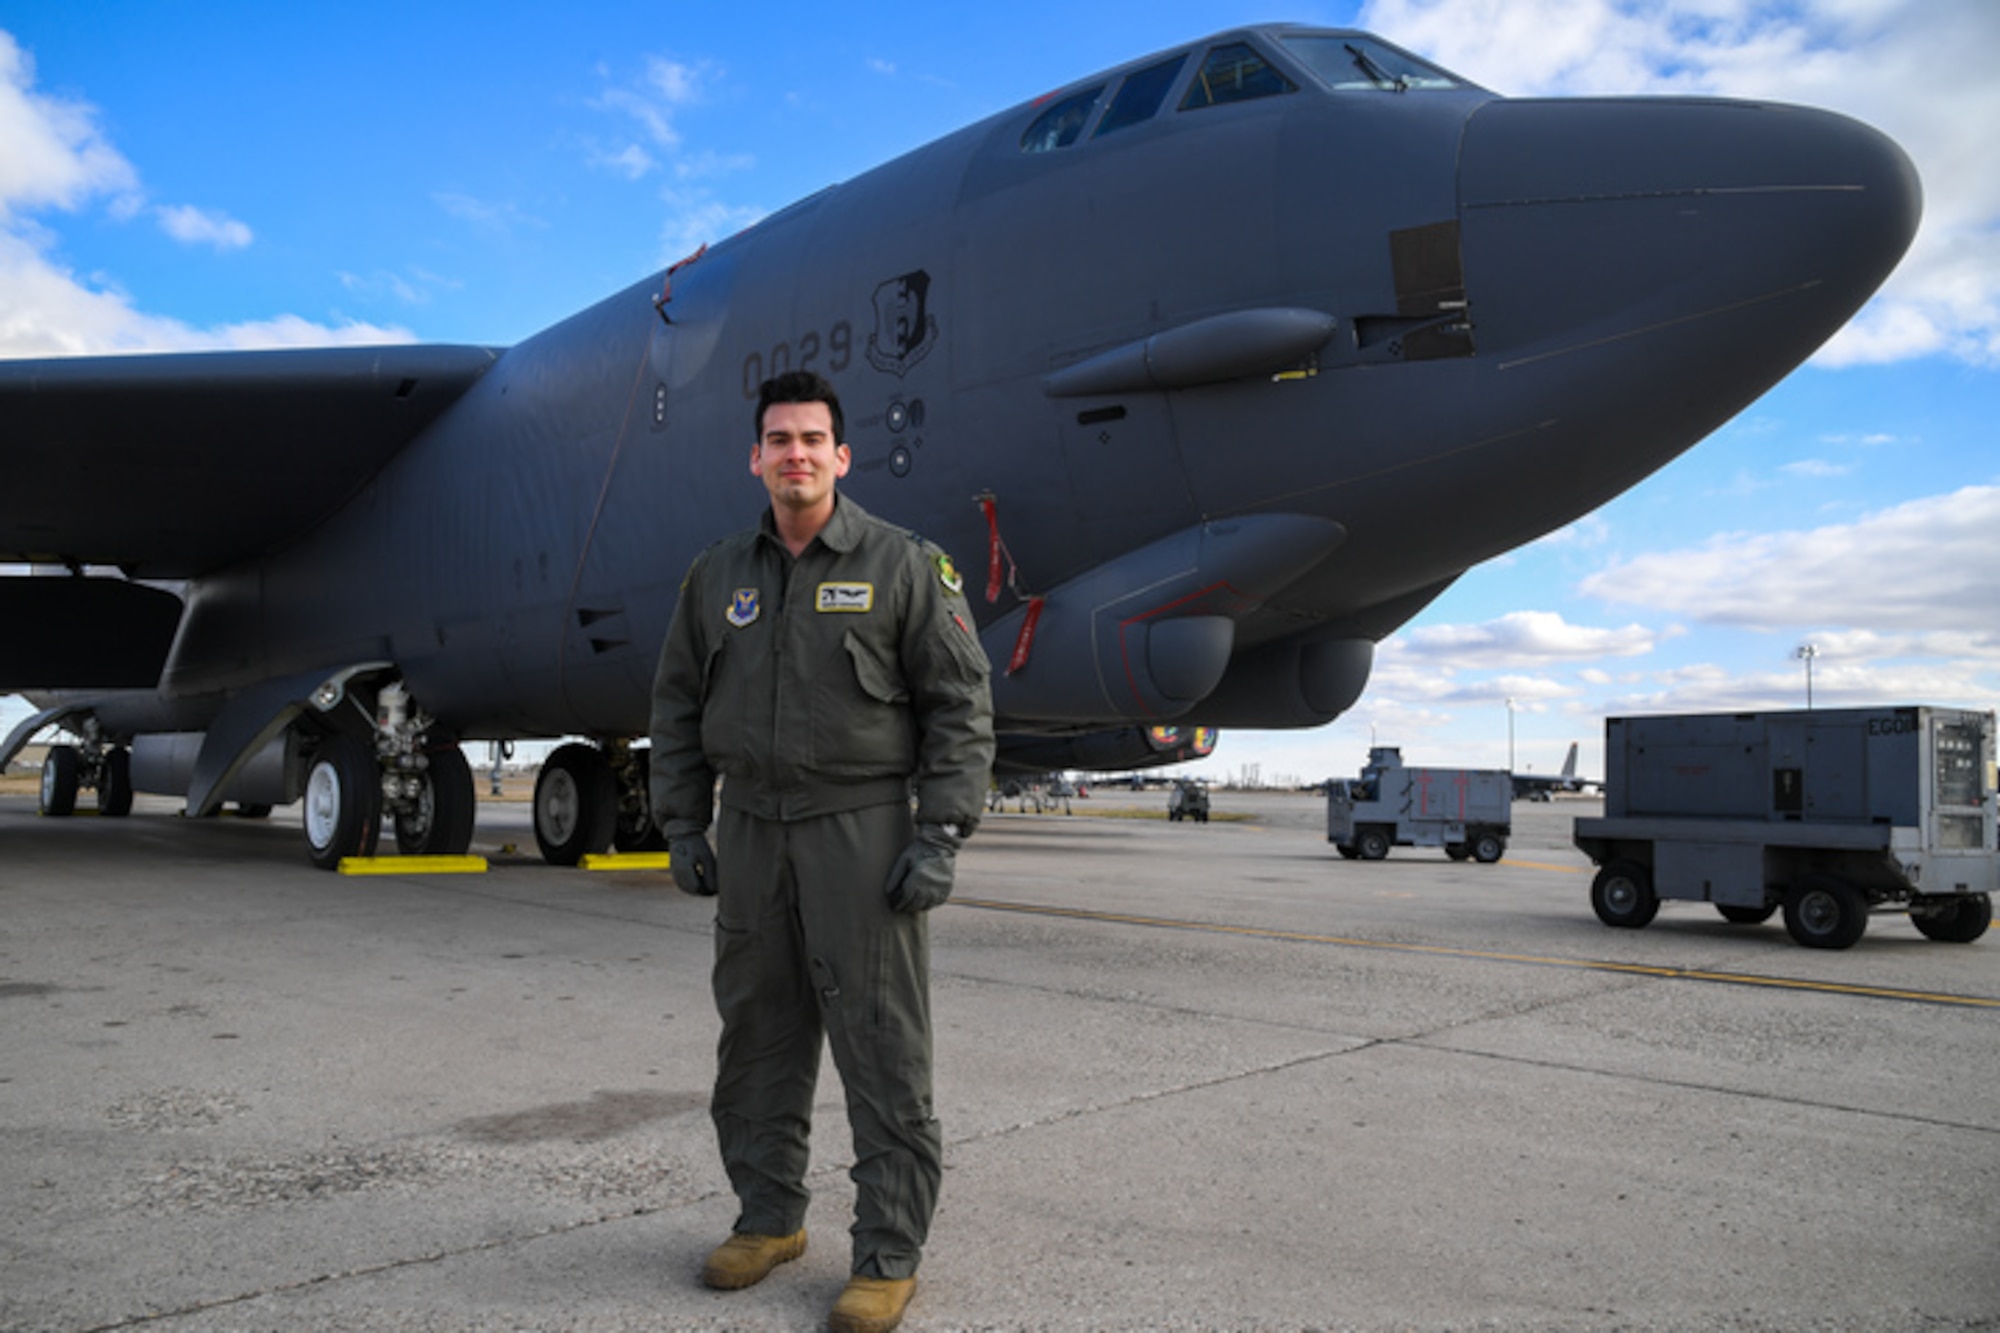 Capt. David Casanova is a B-52 weapons systems officer for the 69th Bomb Squadron. During Prairie Vigilance he works on the Alert Parking Area near the Alert Shack. He is on stand-by and ready to respond at a moment's notice. Casanova and his team are always ready to strike.